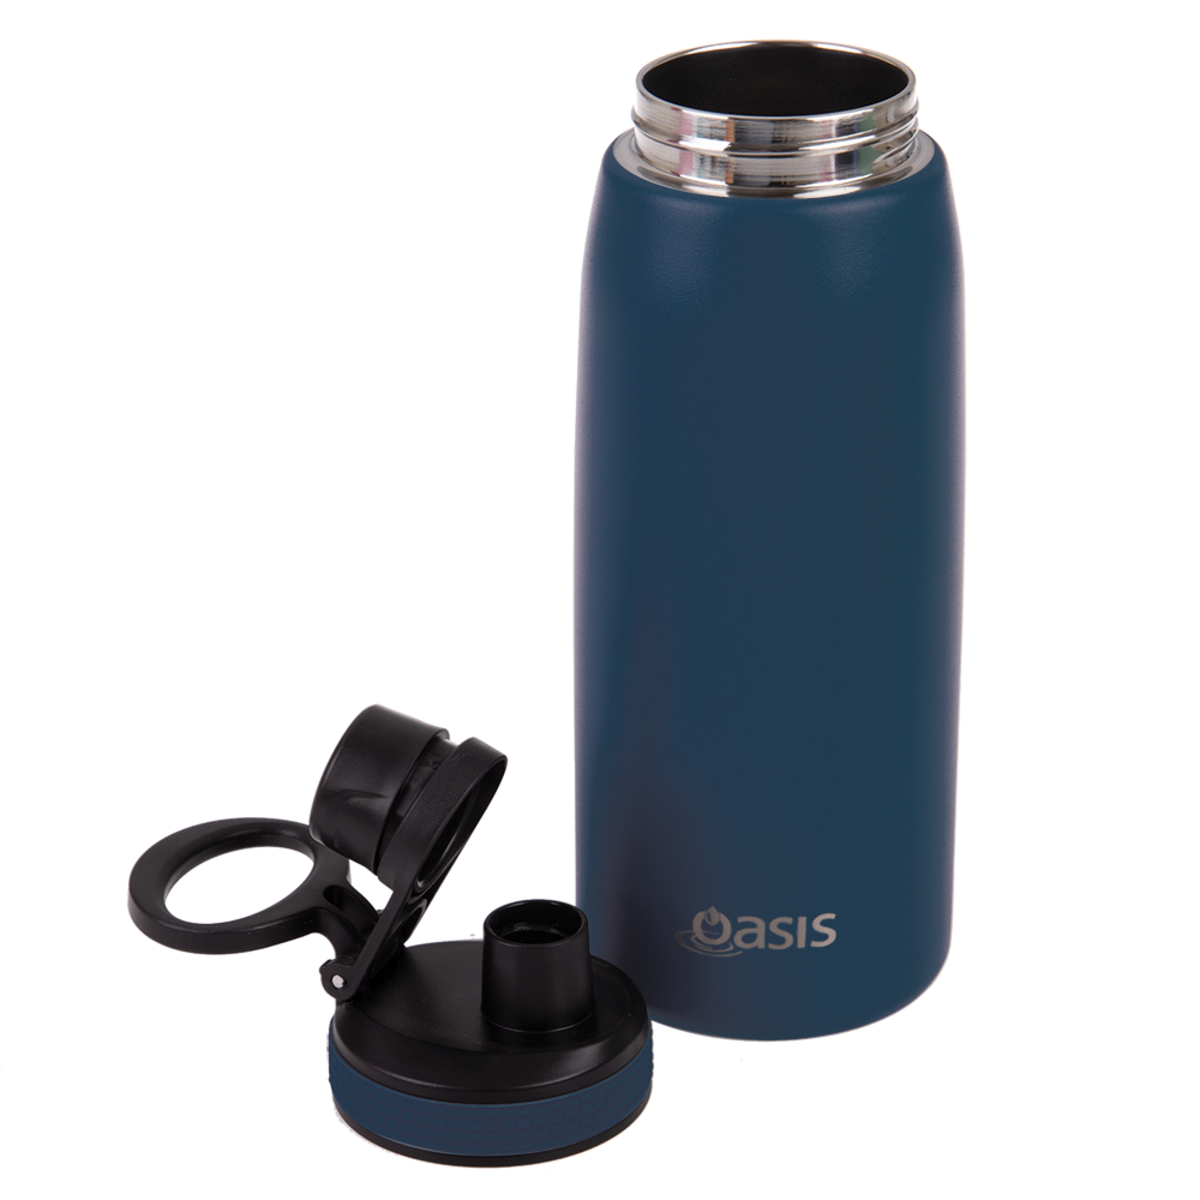 oasis stainless steel double wall insulated sports bottle w/ screw cap 780ml - navy